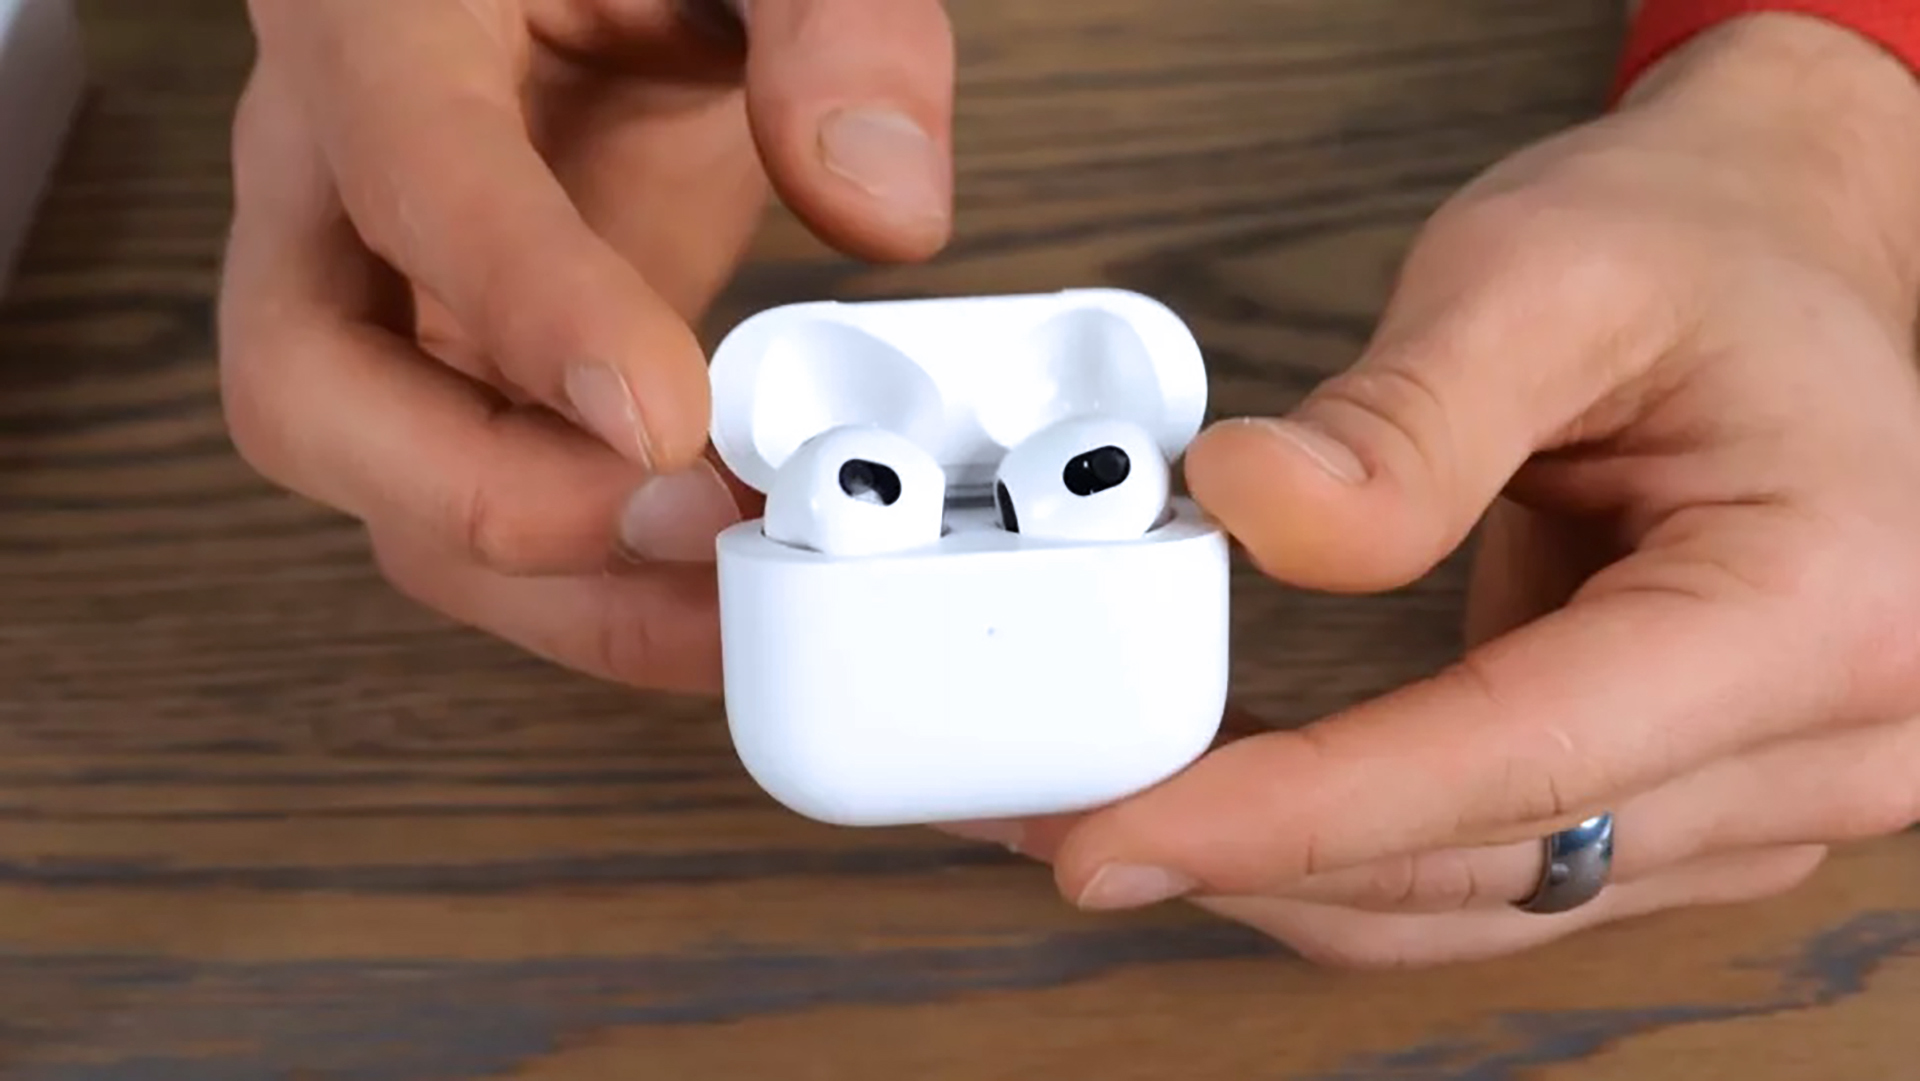 Supposedly leaked third-generation airpods.